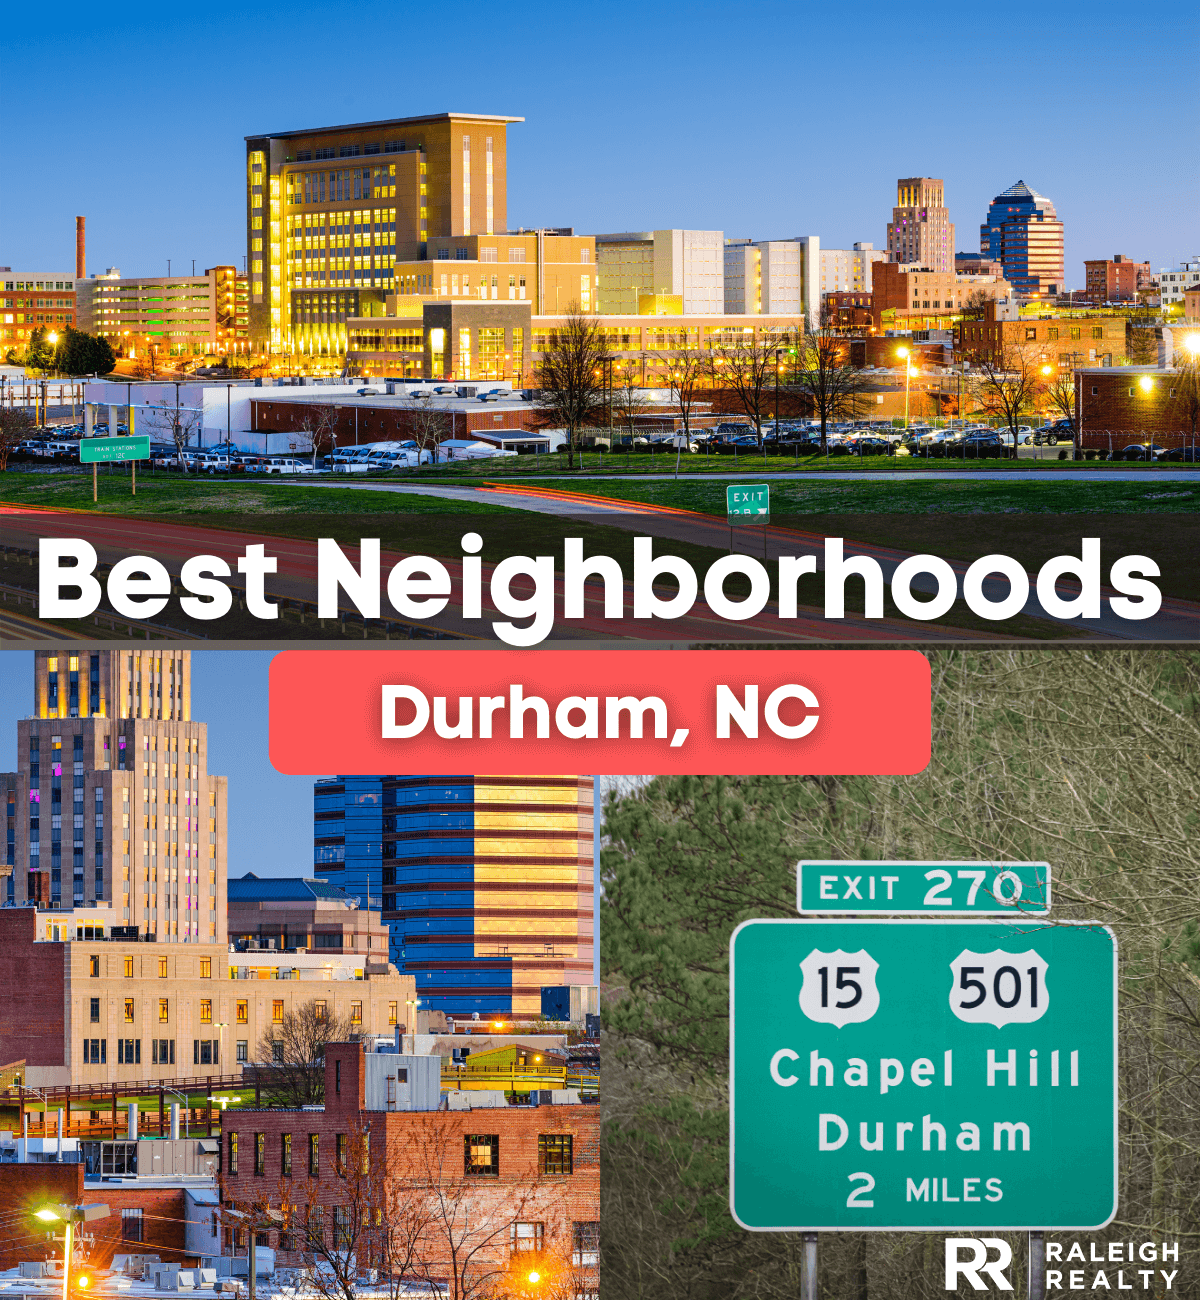 Best neighborhoods in Durham, NC - Best Places to live in Durham, NC!